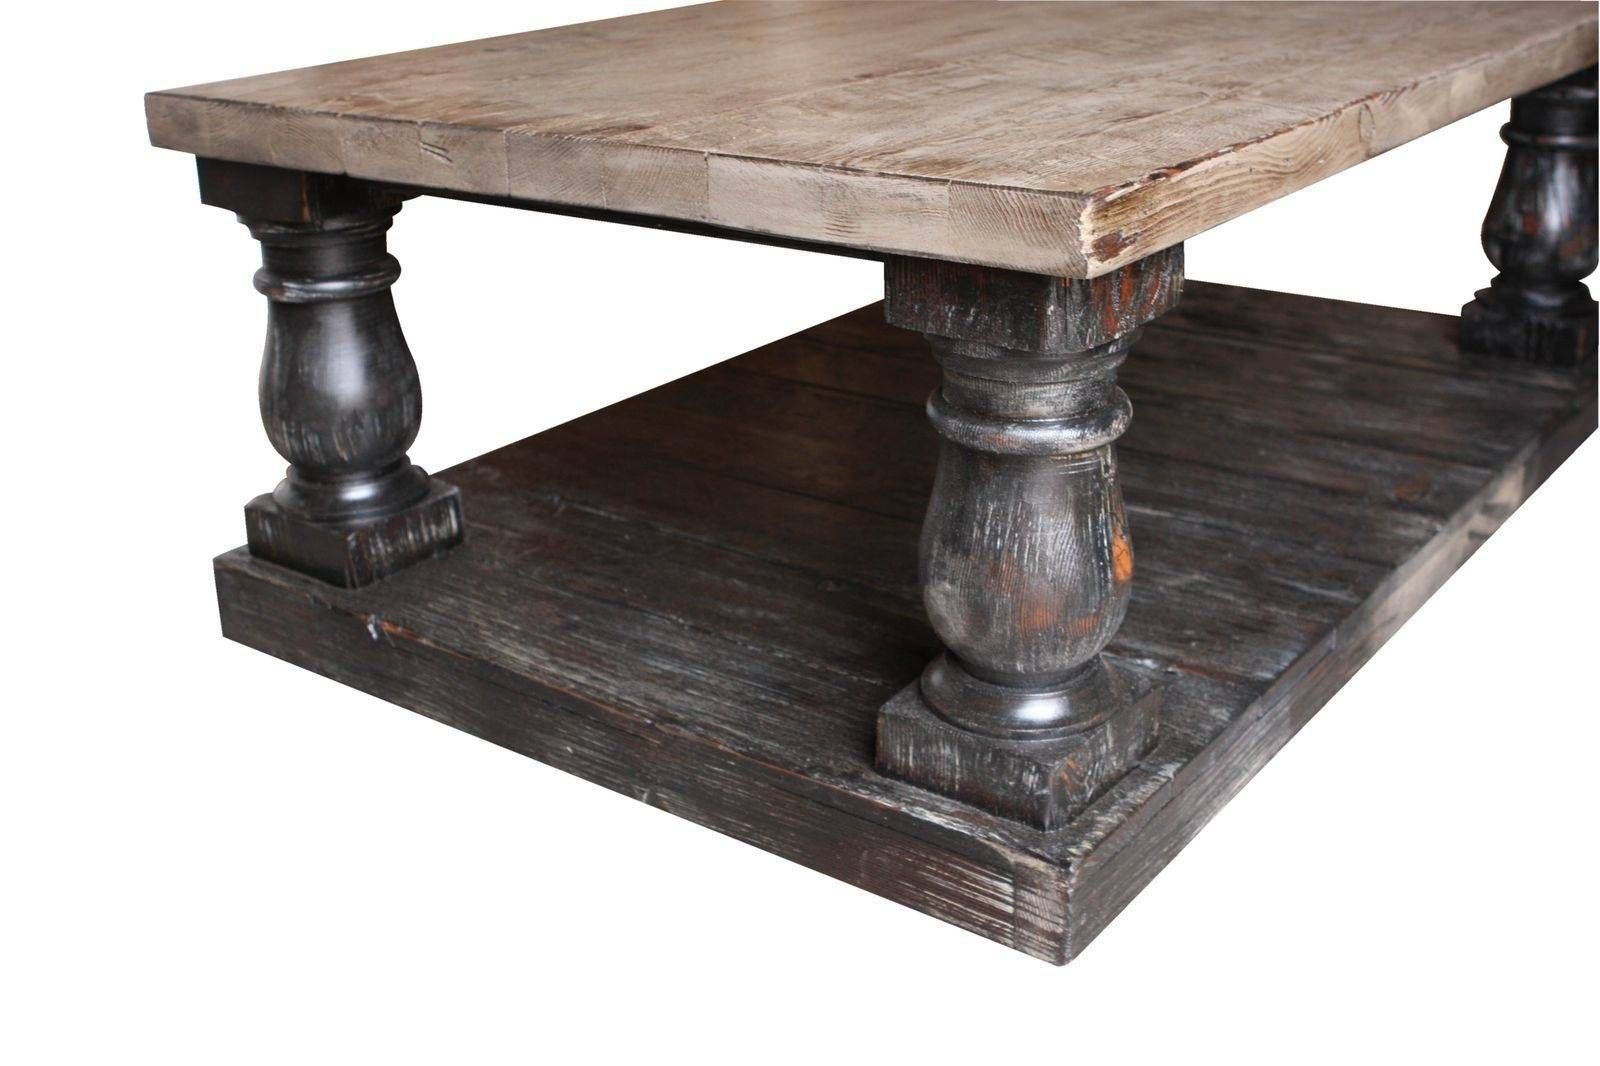 Table : Rustic Square Coffee Table Asian Large Rustic Square Inside Large Rustic Coffee Tables (View 7 of 15)